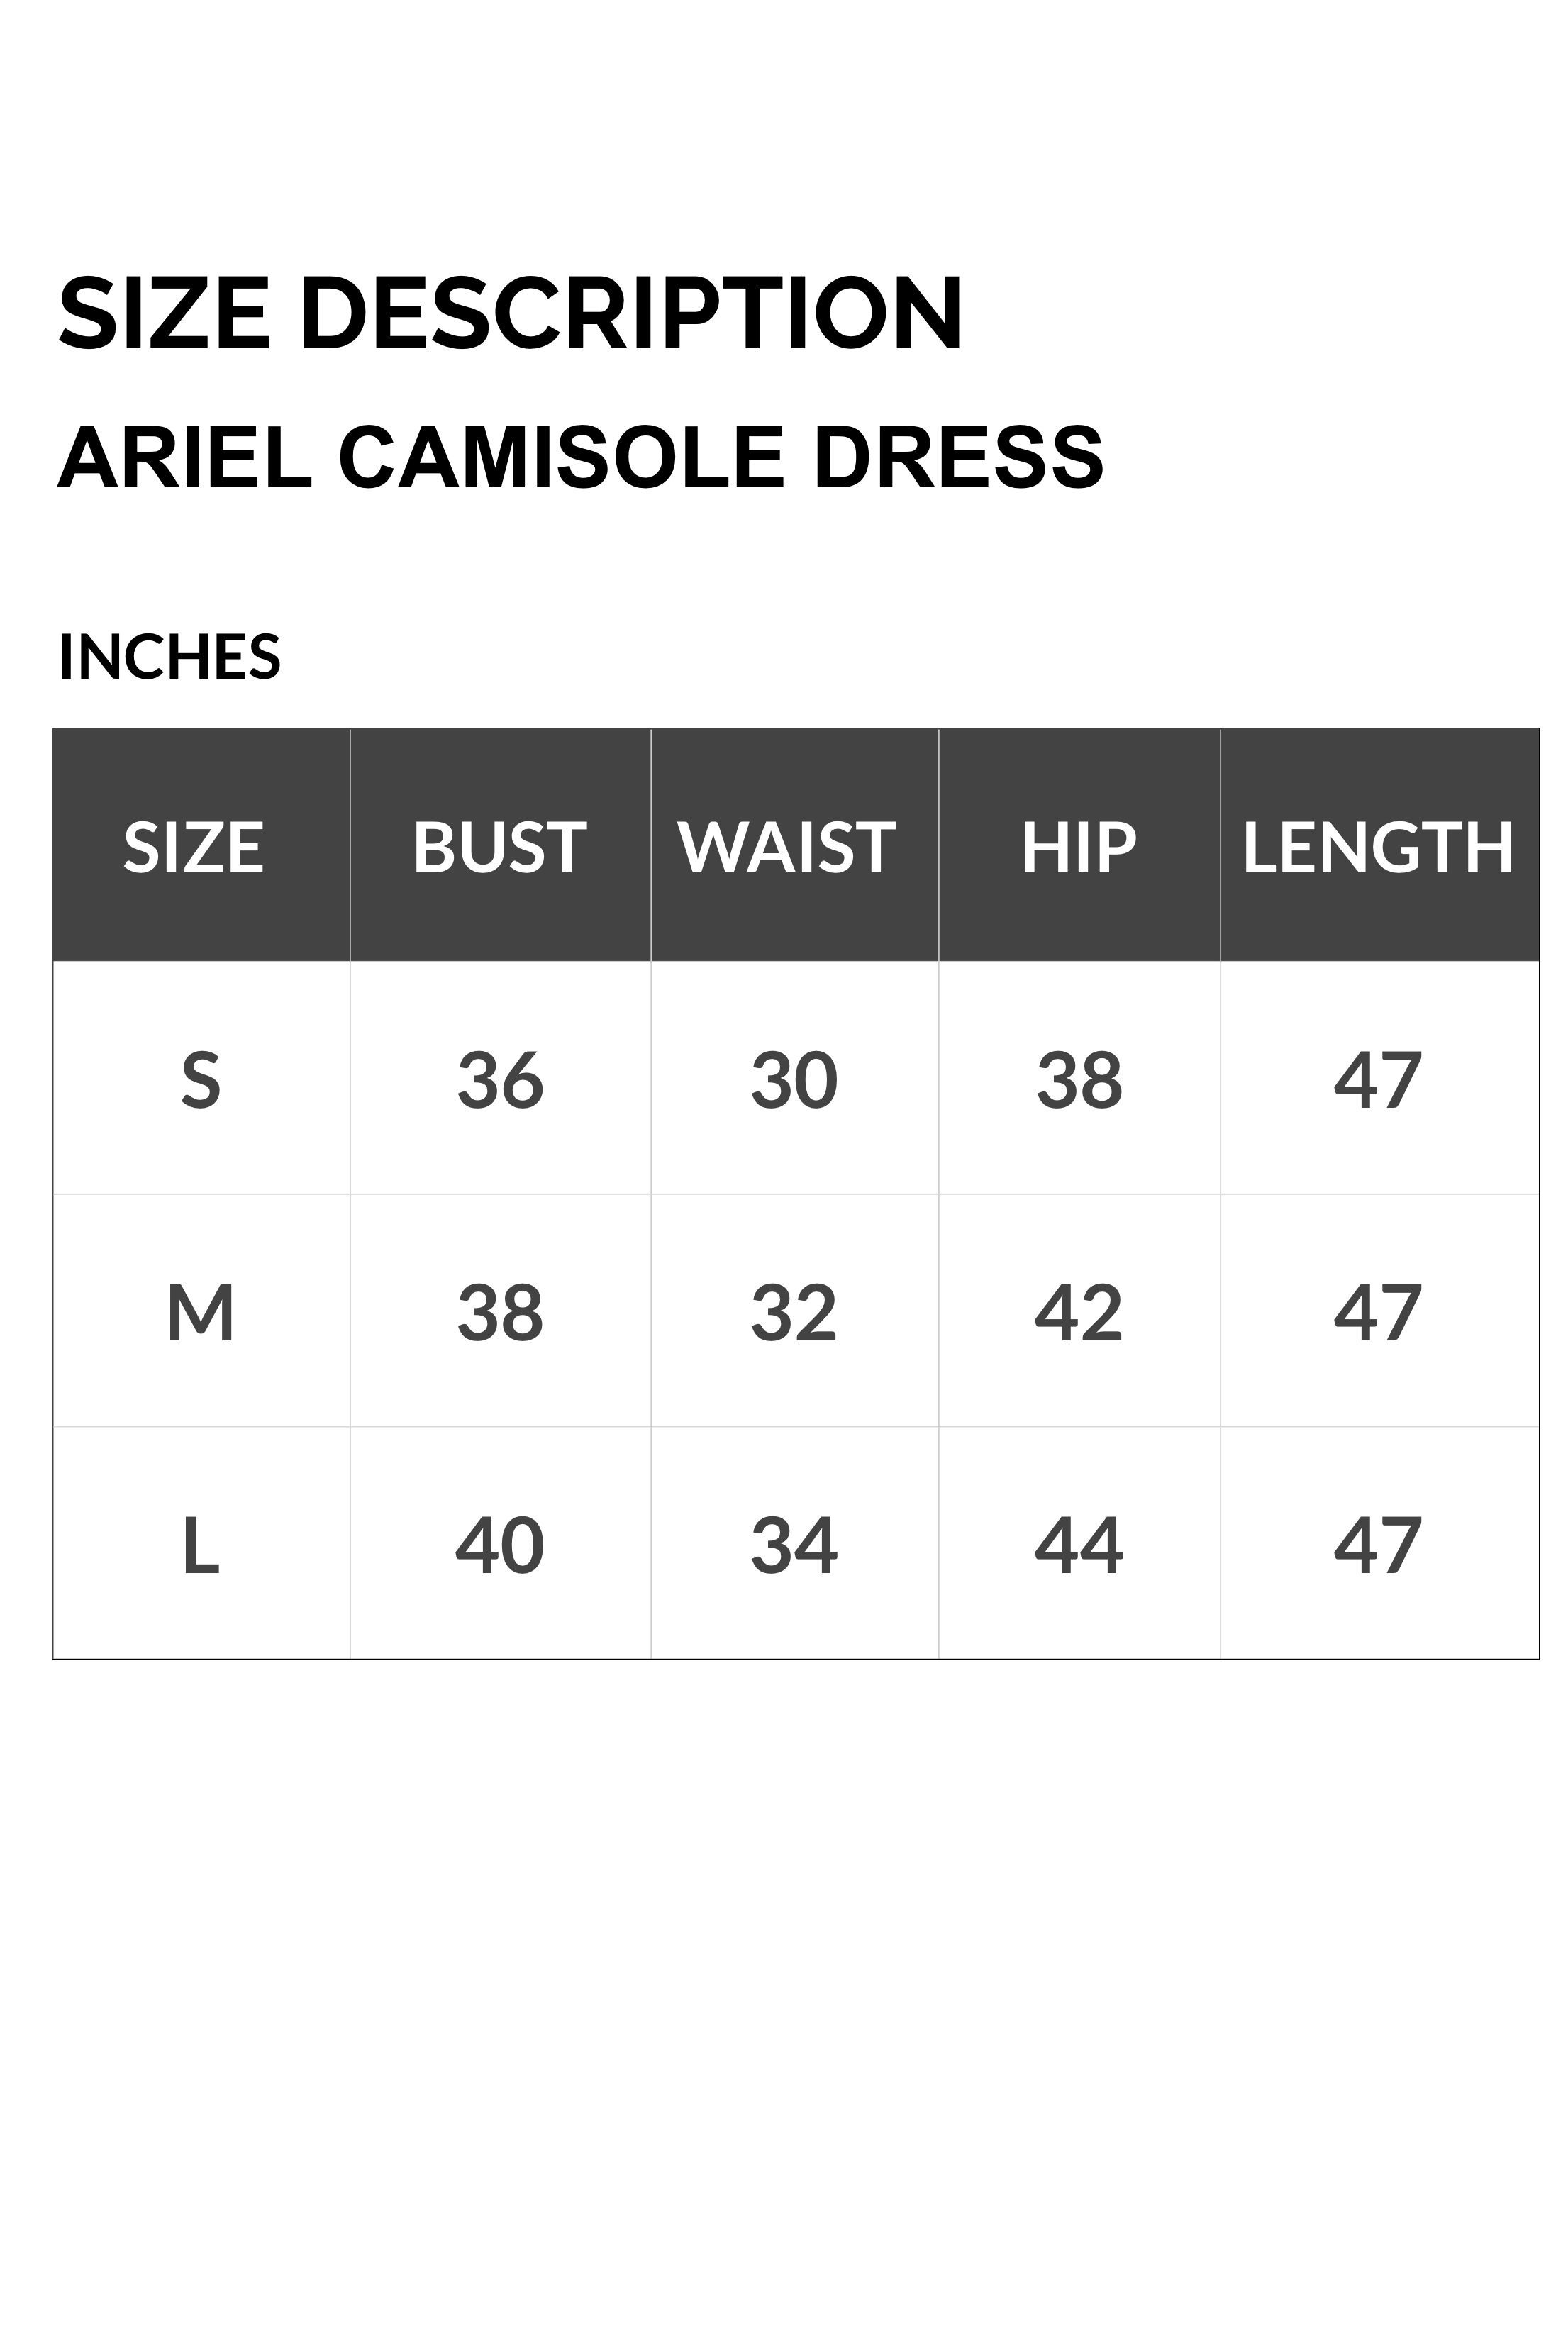 SIZES AFRICAN CAMISOLE DRESS